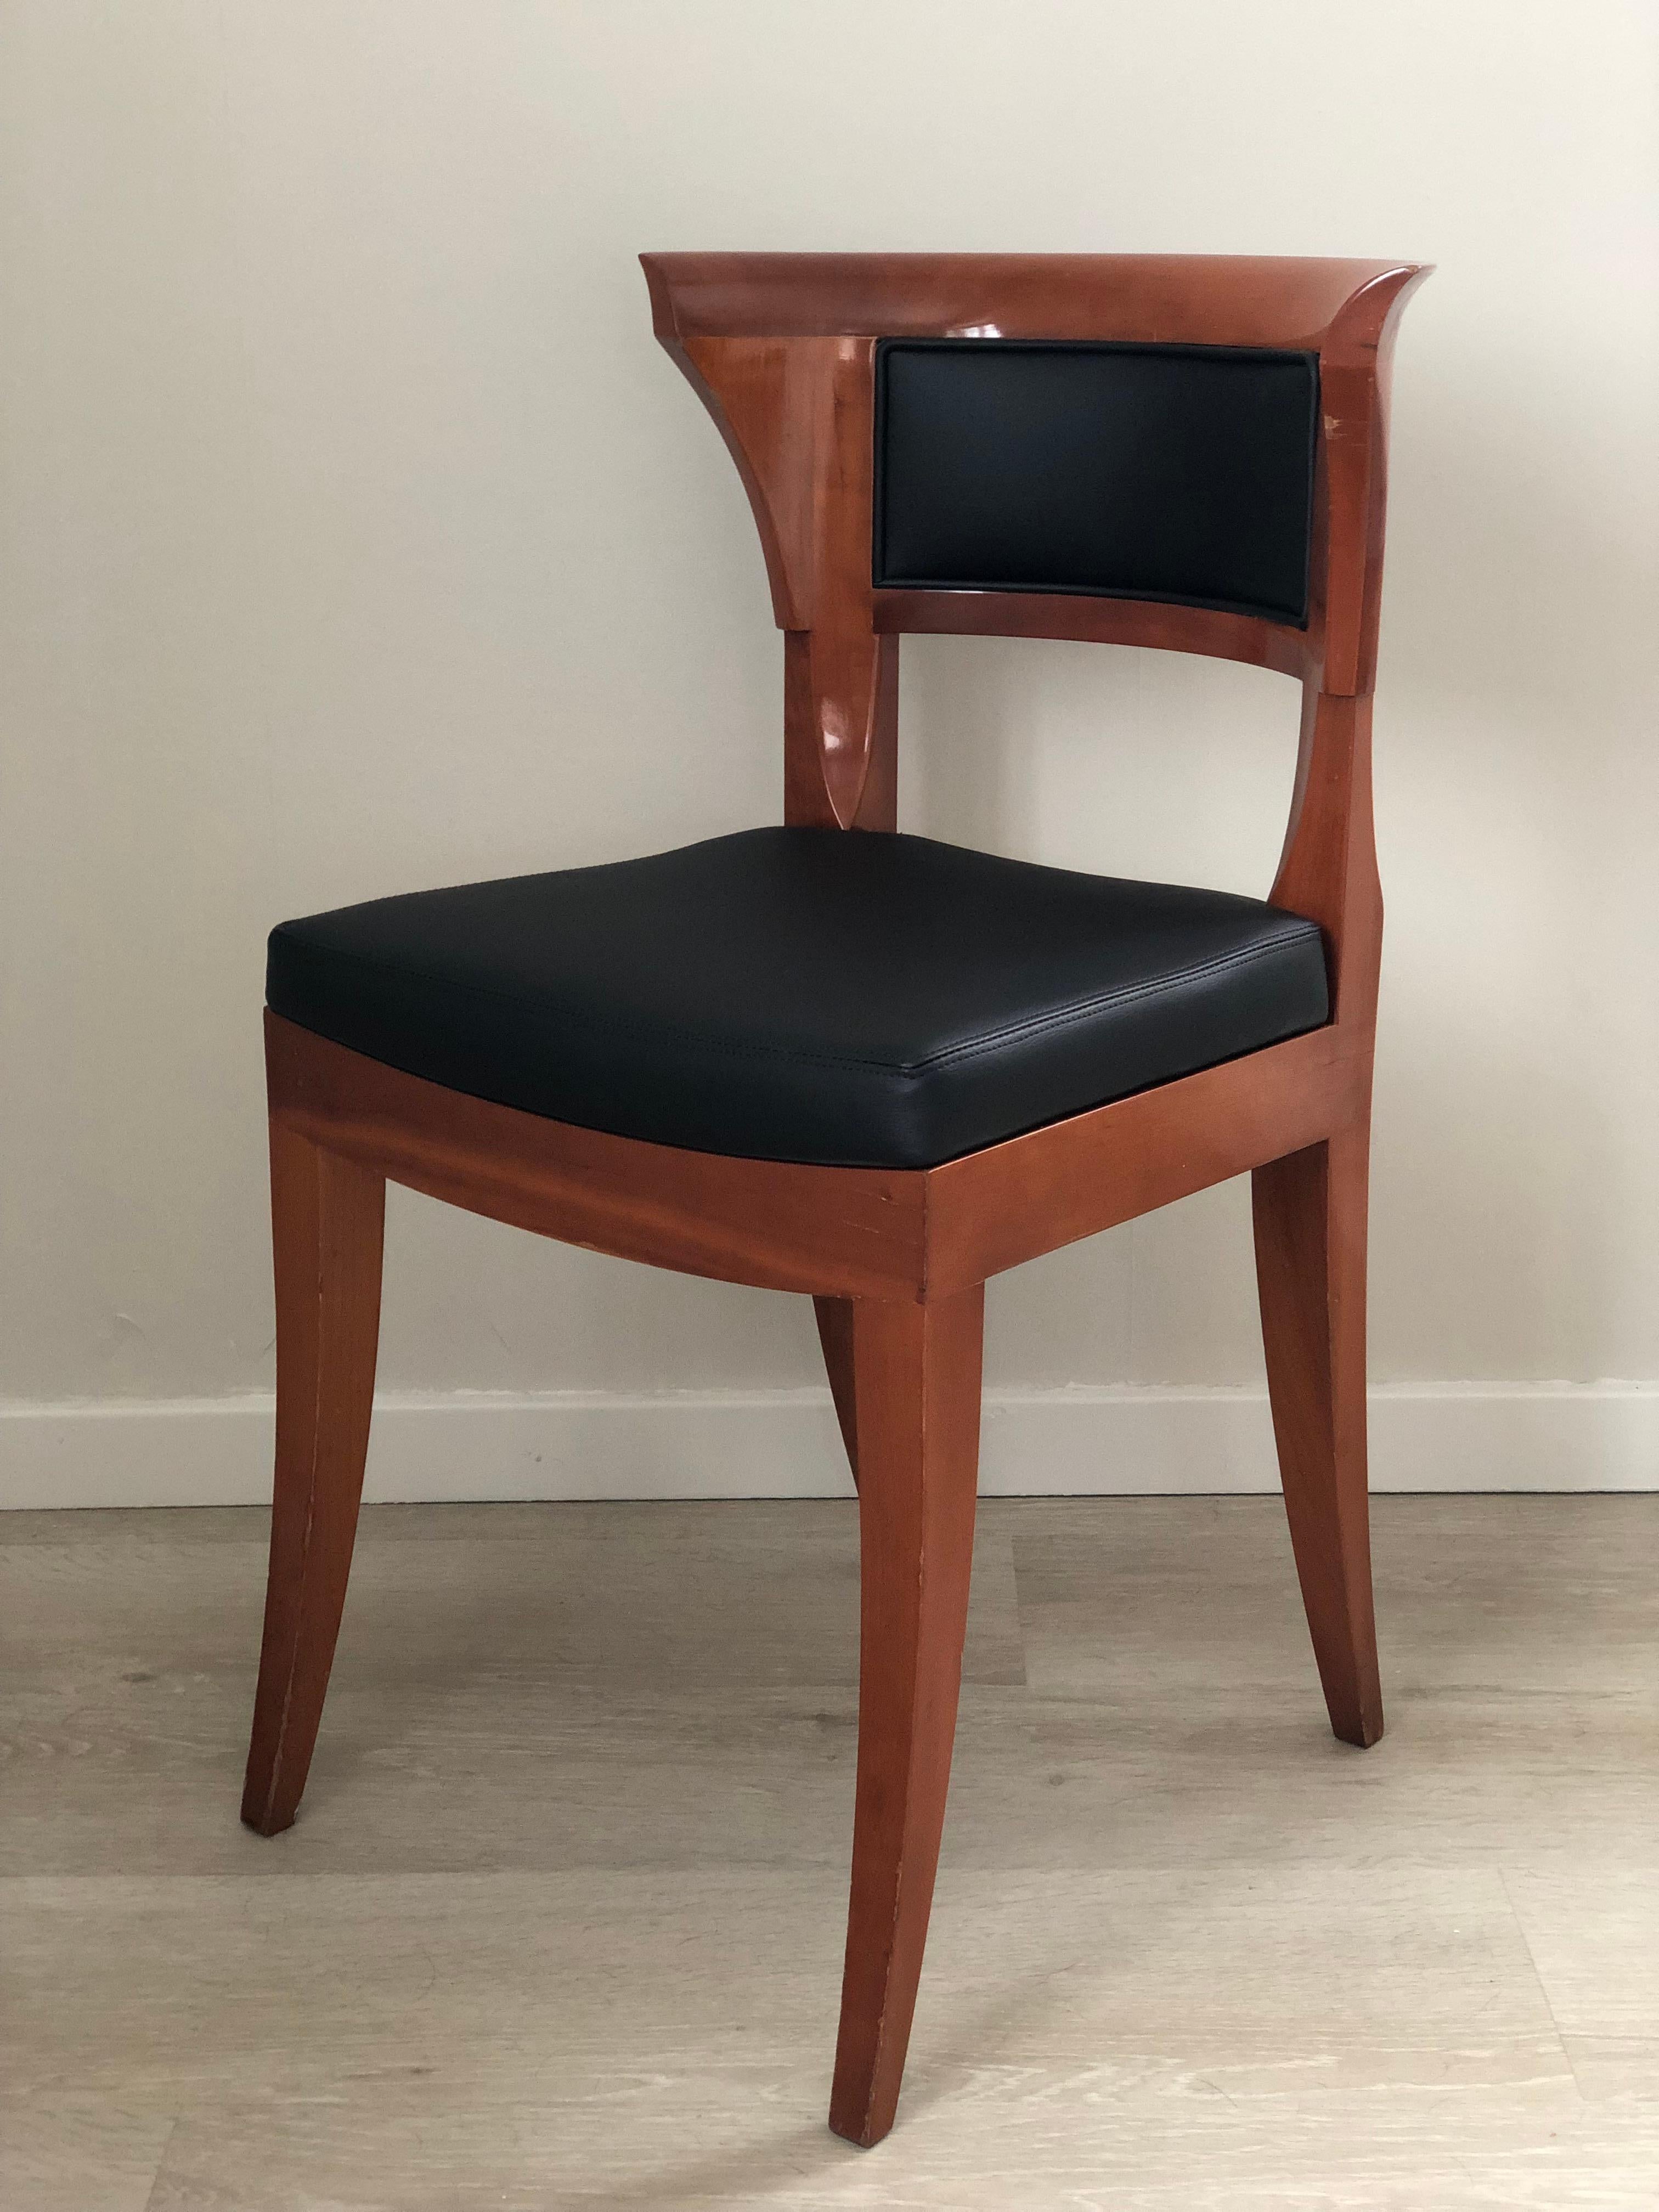 An exquisite design dining chair in solid cherry wood by Leon Krier for Giorgetti. Set of 4. The chair features an elegant curved backrest with high quality black imitation leather on the front, rear and on the seat.
Each chair has its own nameplate